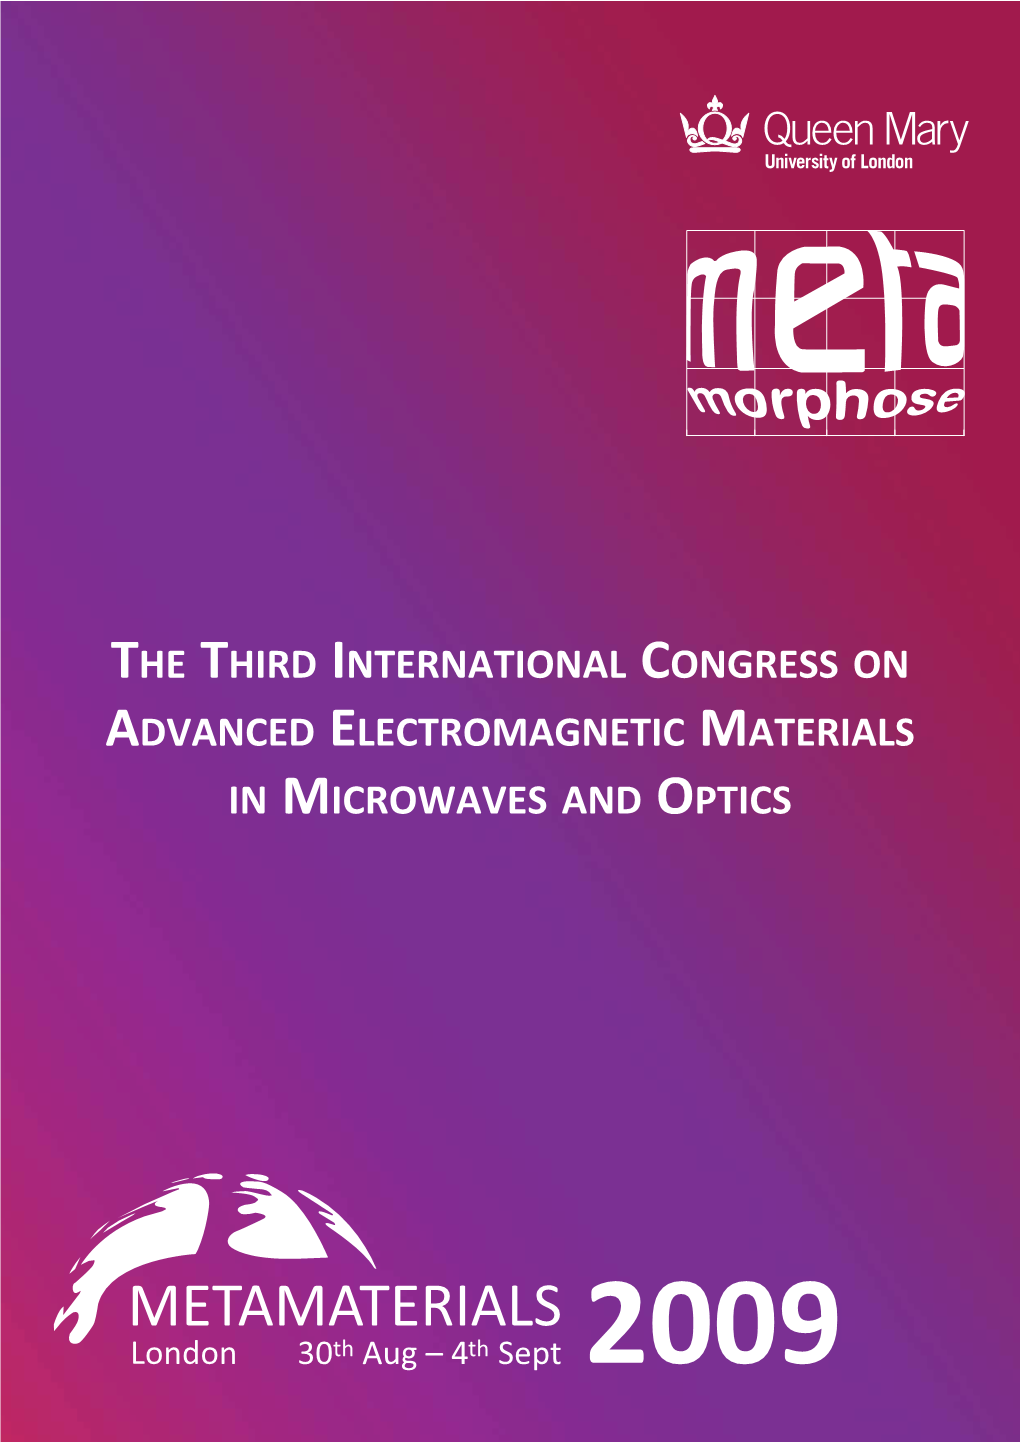 The Third International Congress on Advanced Electromagnetic Materials in Microwaves and Optics